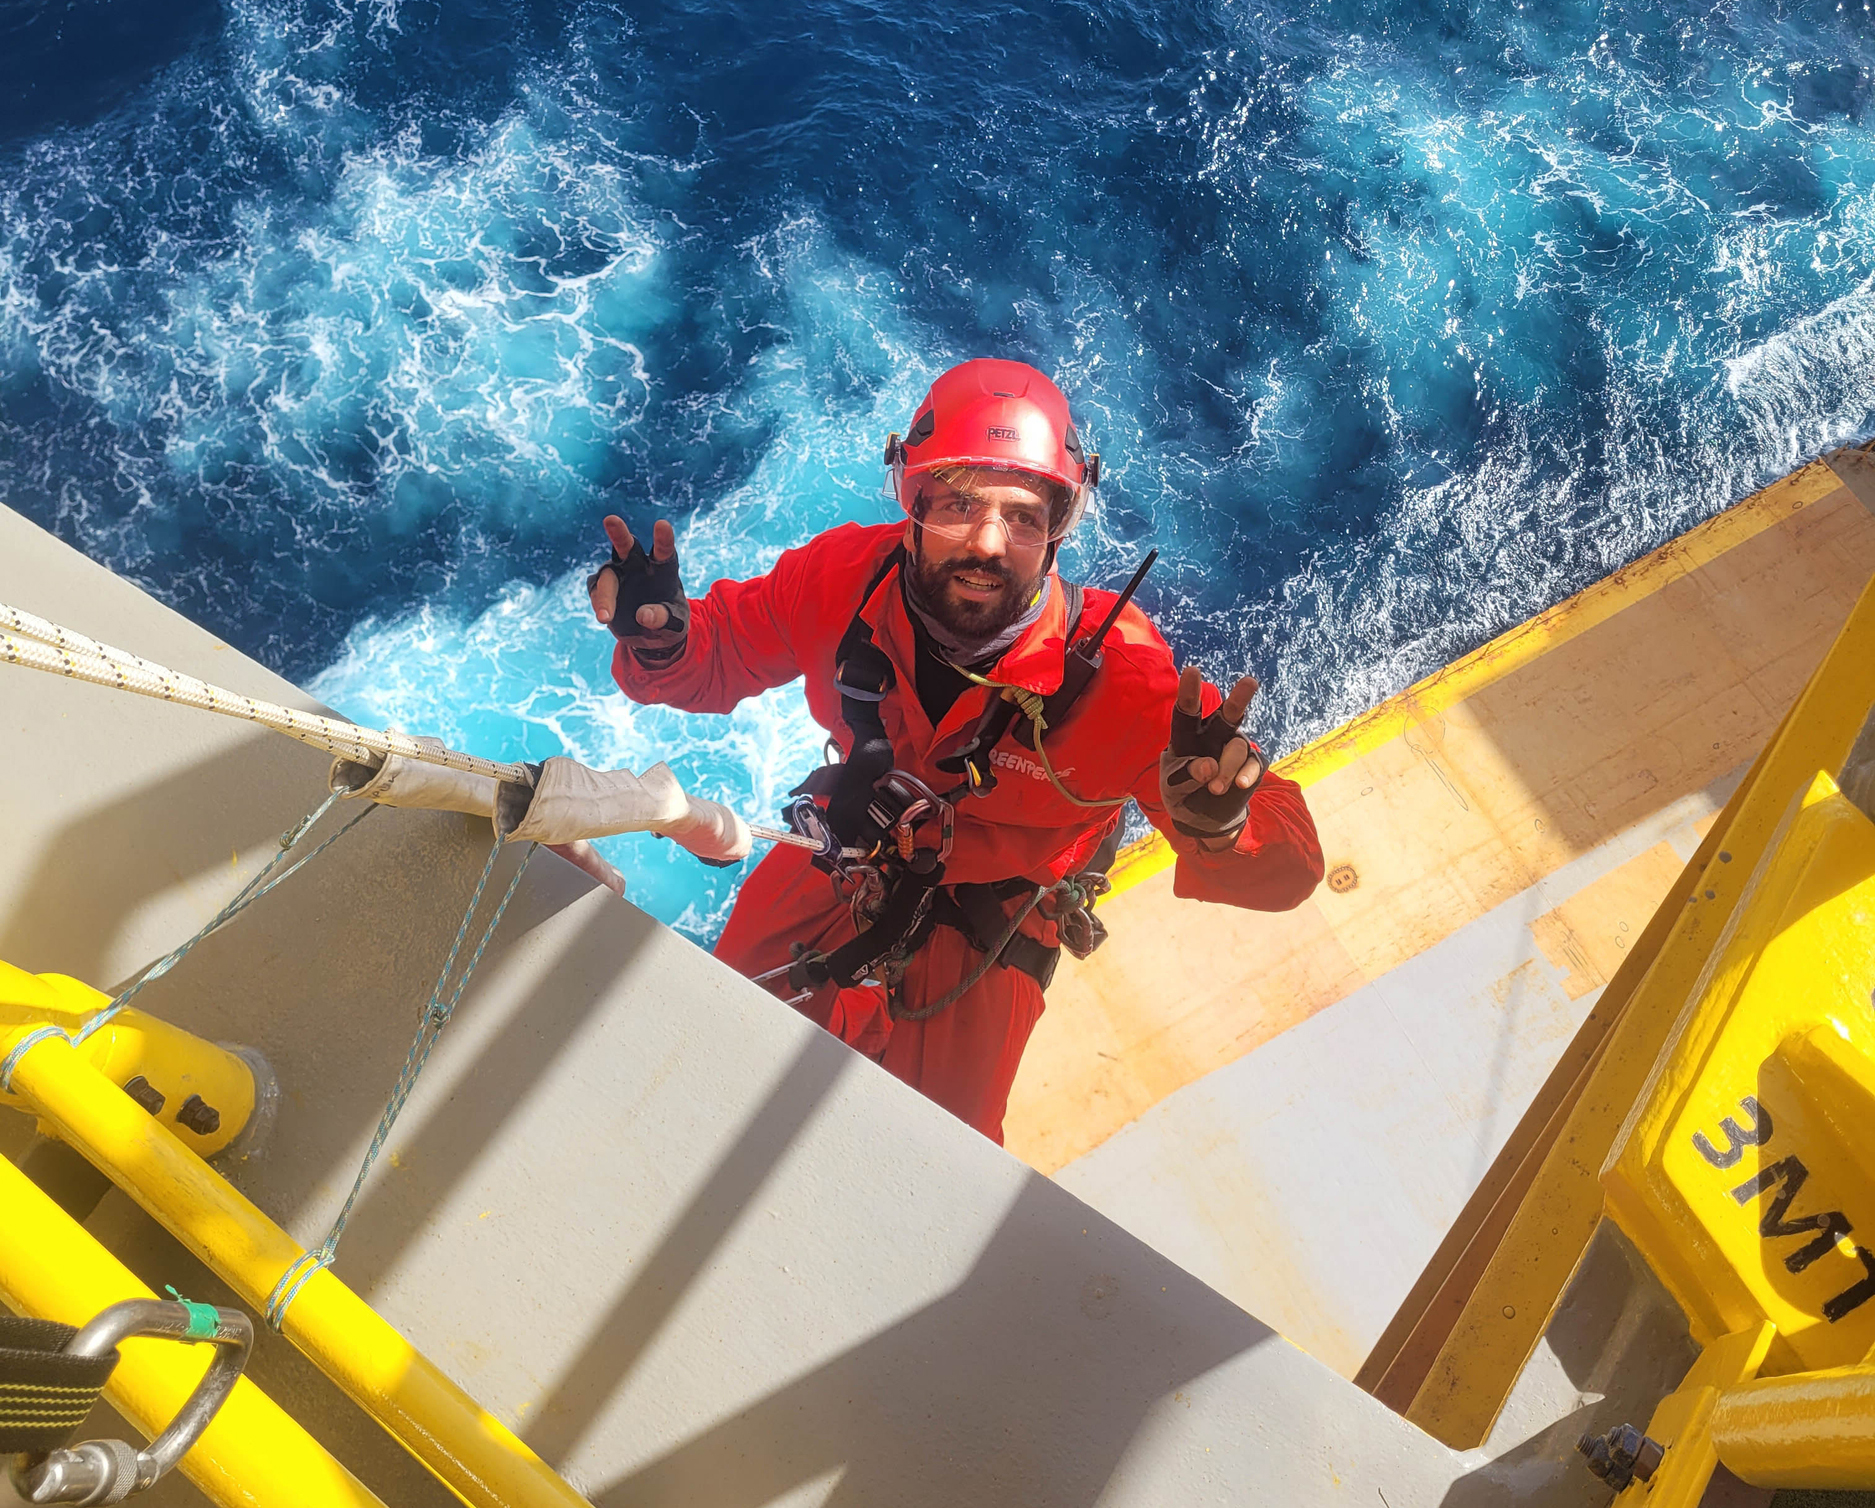 A greenpeace activist in a helmet and red overalls abseiling off an industrial platform over the ocean. He's flashing a peace sign to the camera.